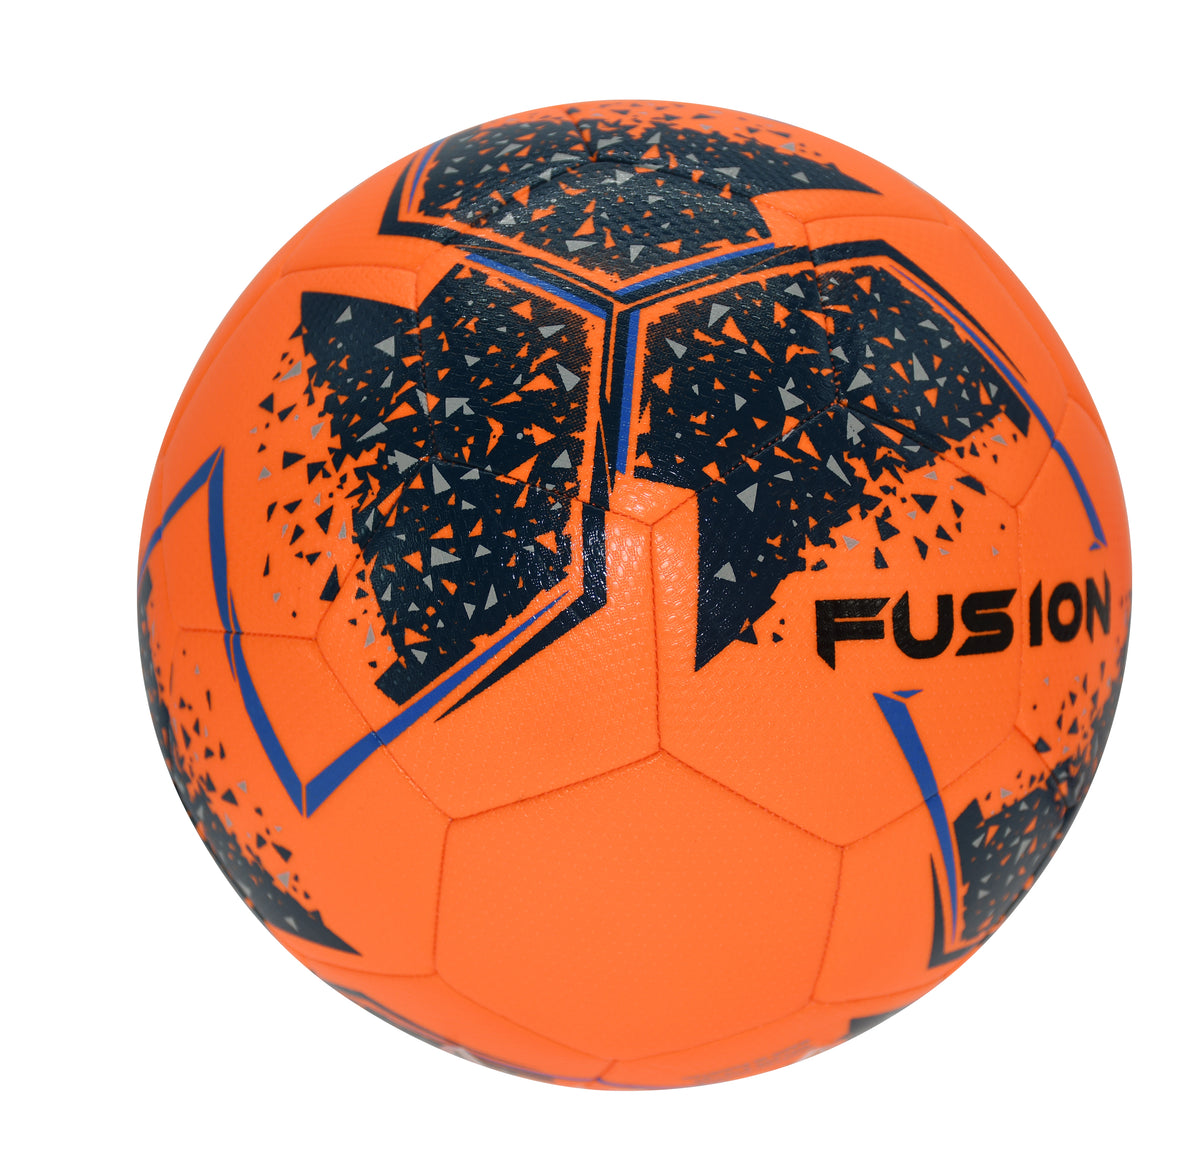 Fusion IMS Training Ball x 10 with Bag